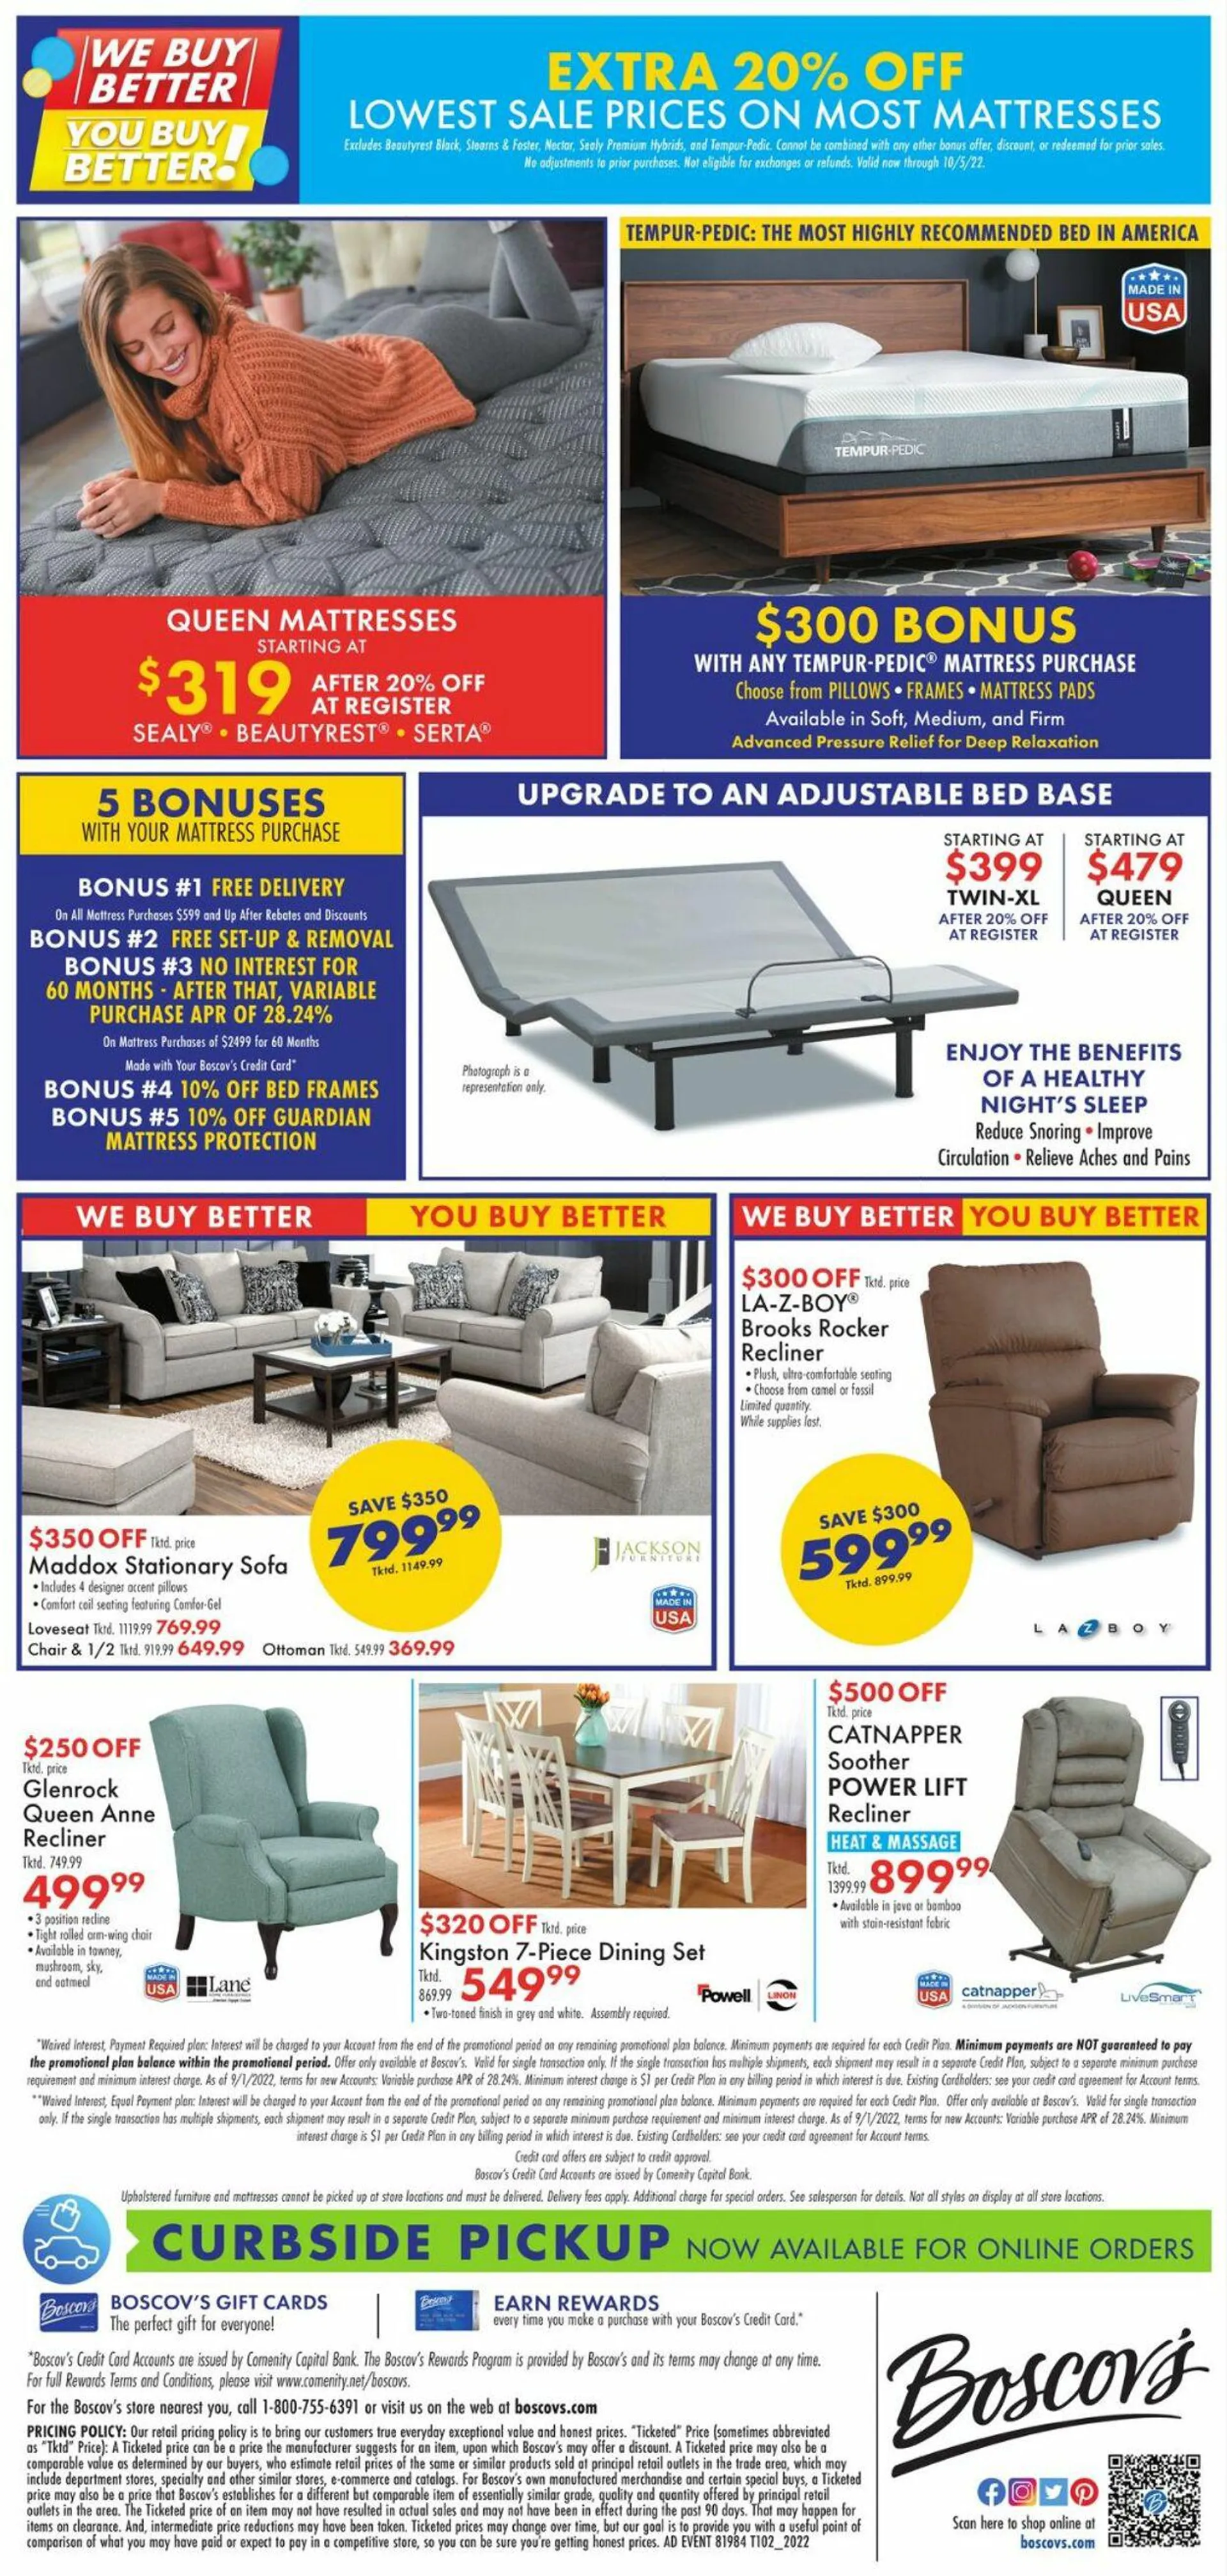 Boscovs Current weekly ad - 16